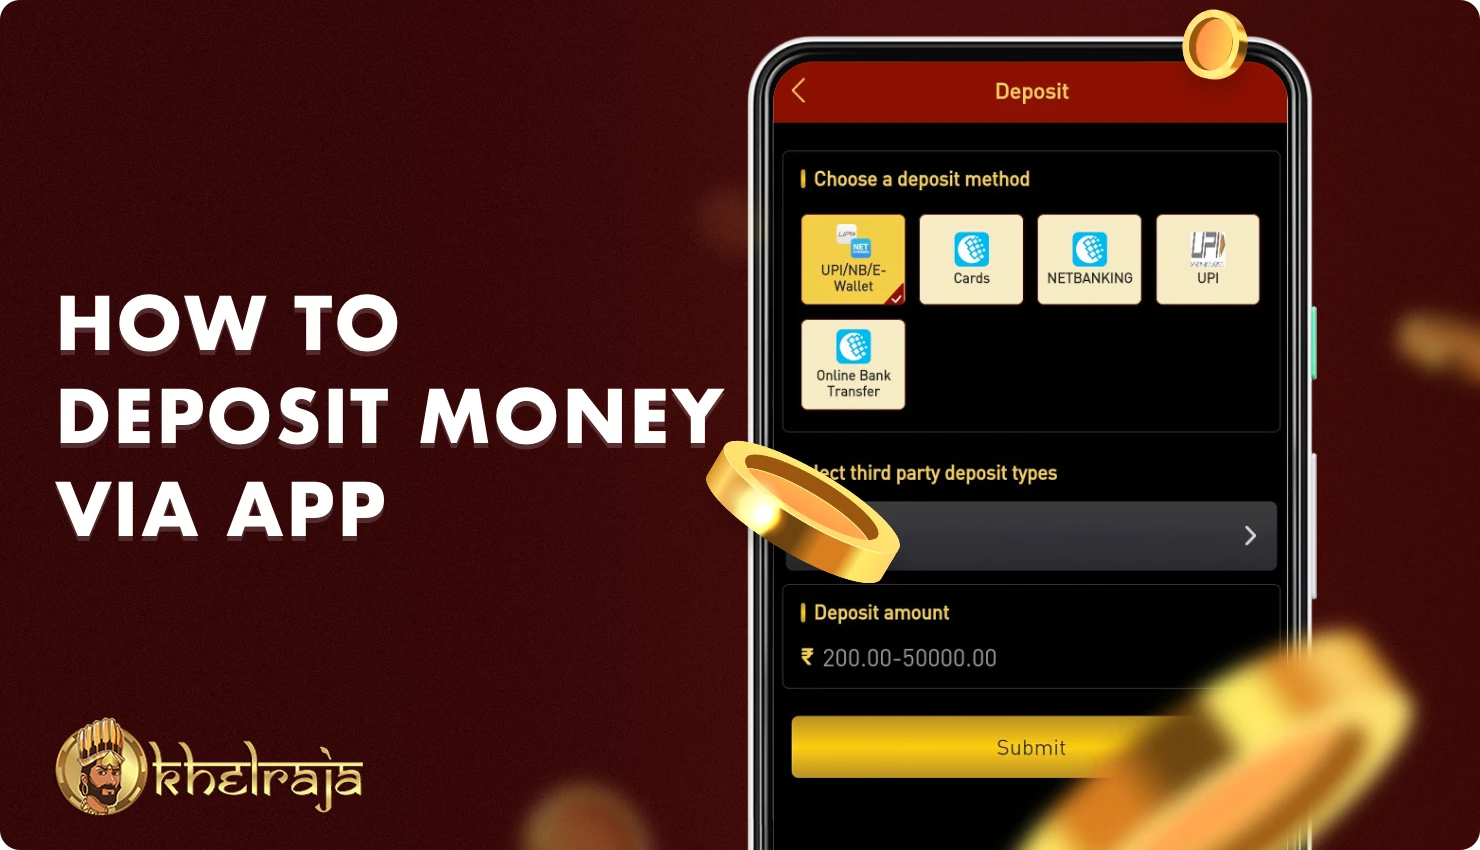 Making a deposit on the Khelraja app is literally just a few clicks away